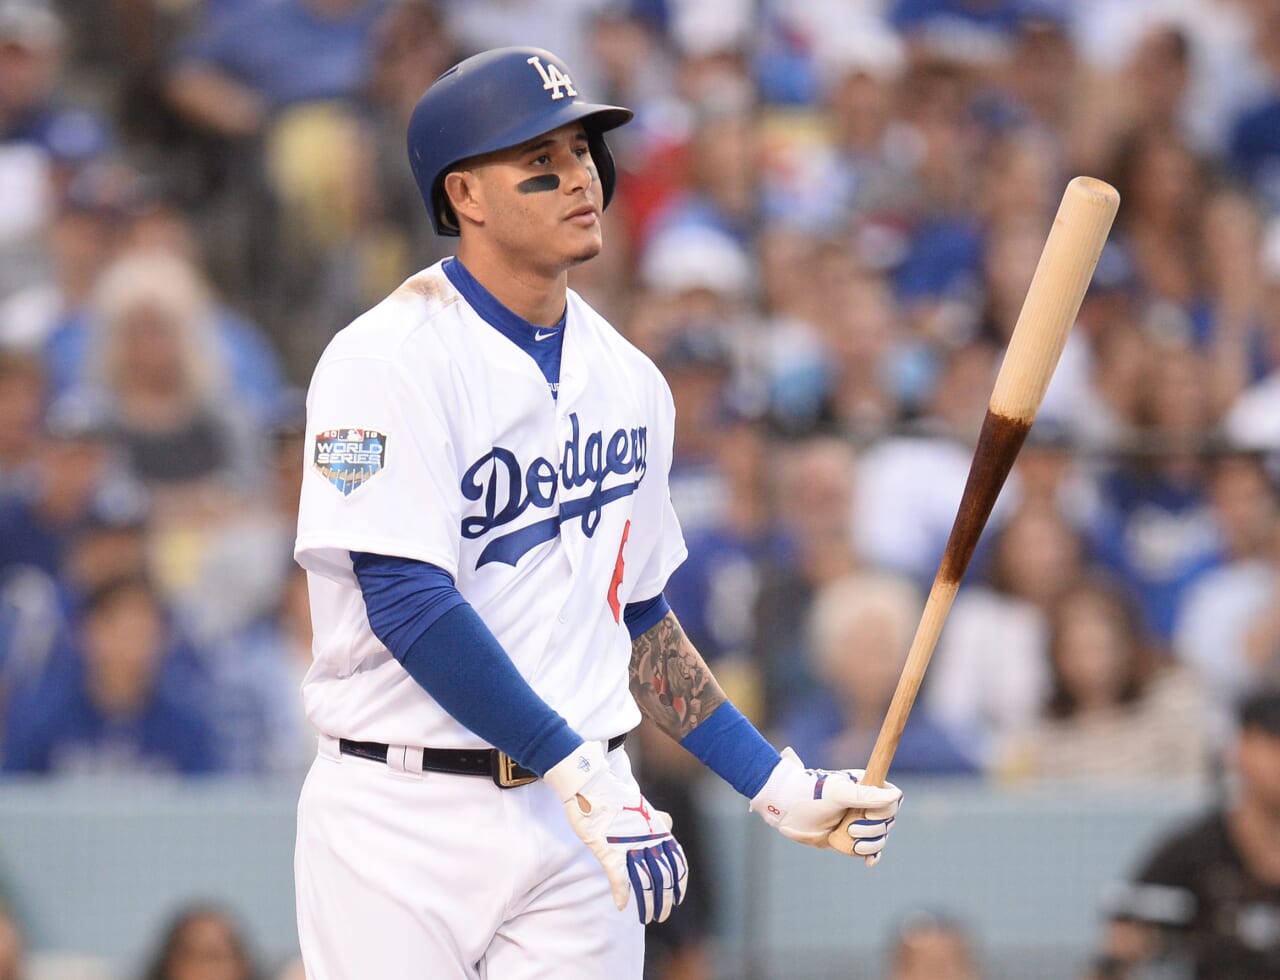 New York Yankees: How Does Troy Tulowitzki Signing Affect Manny Machado Deal?